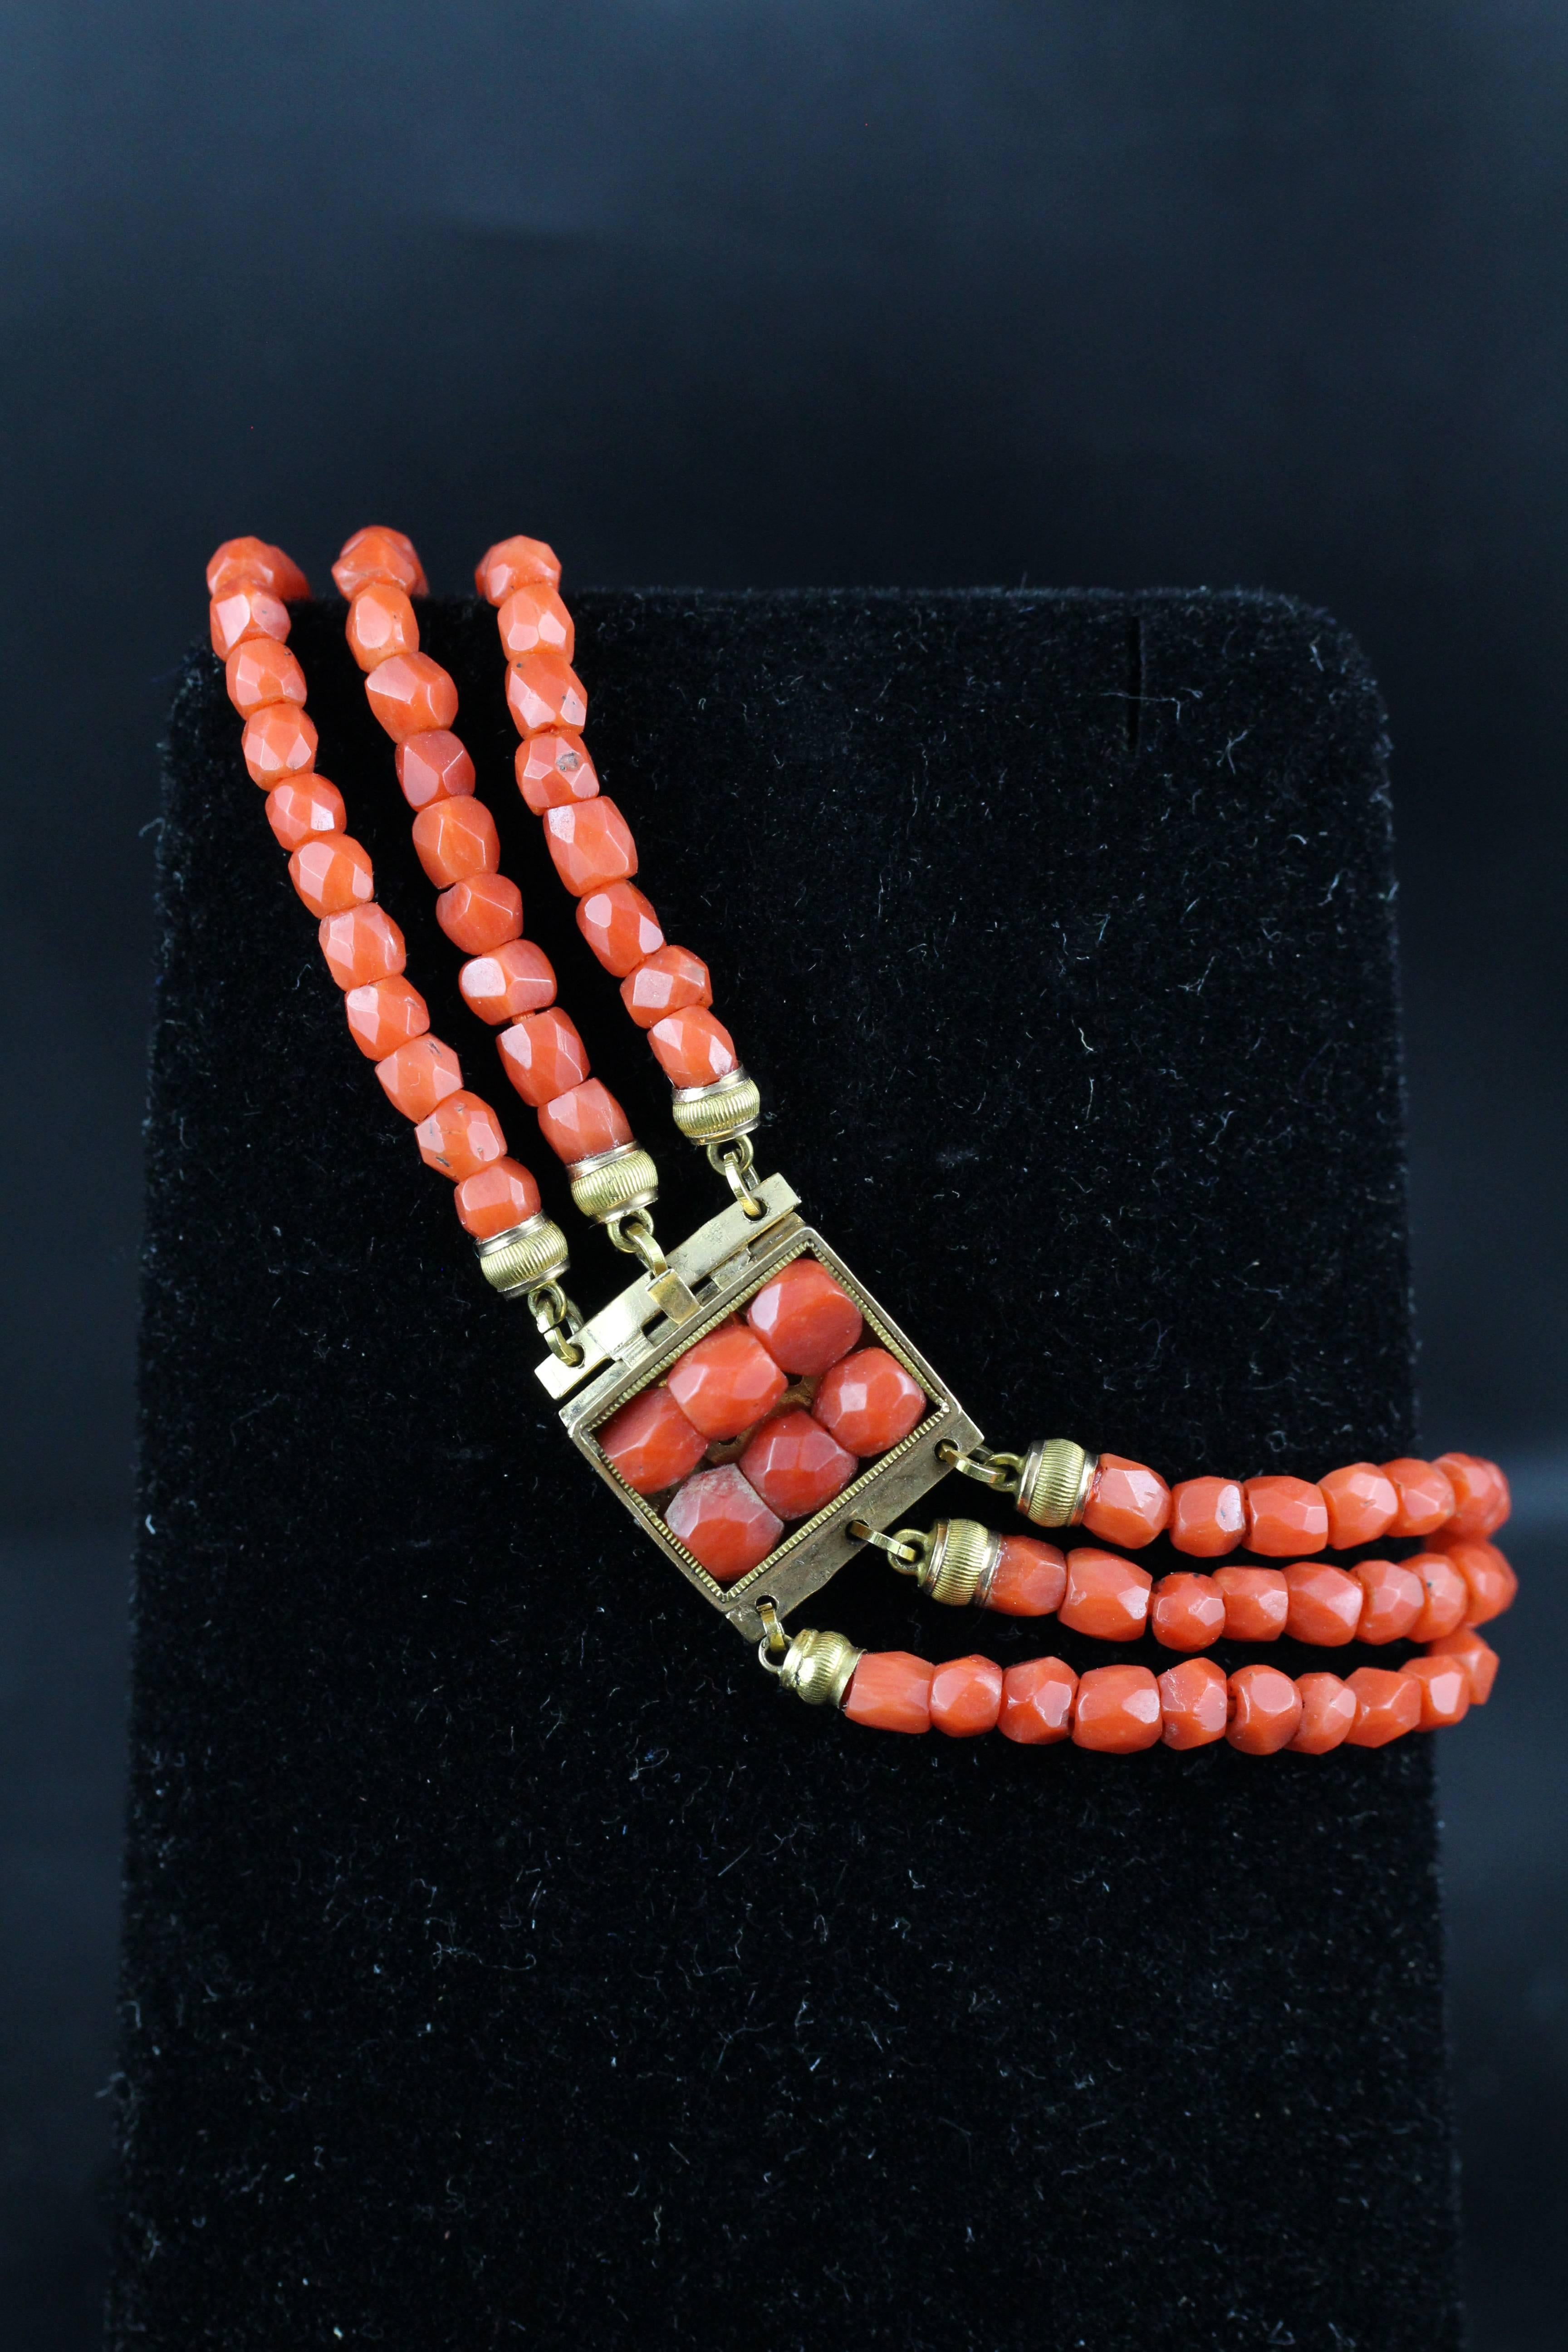 Napoleon III Antique 19th Century French Coral Pearls Bracelet with Gold Clasp